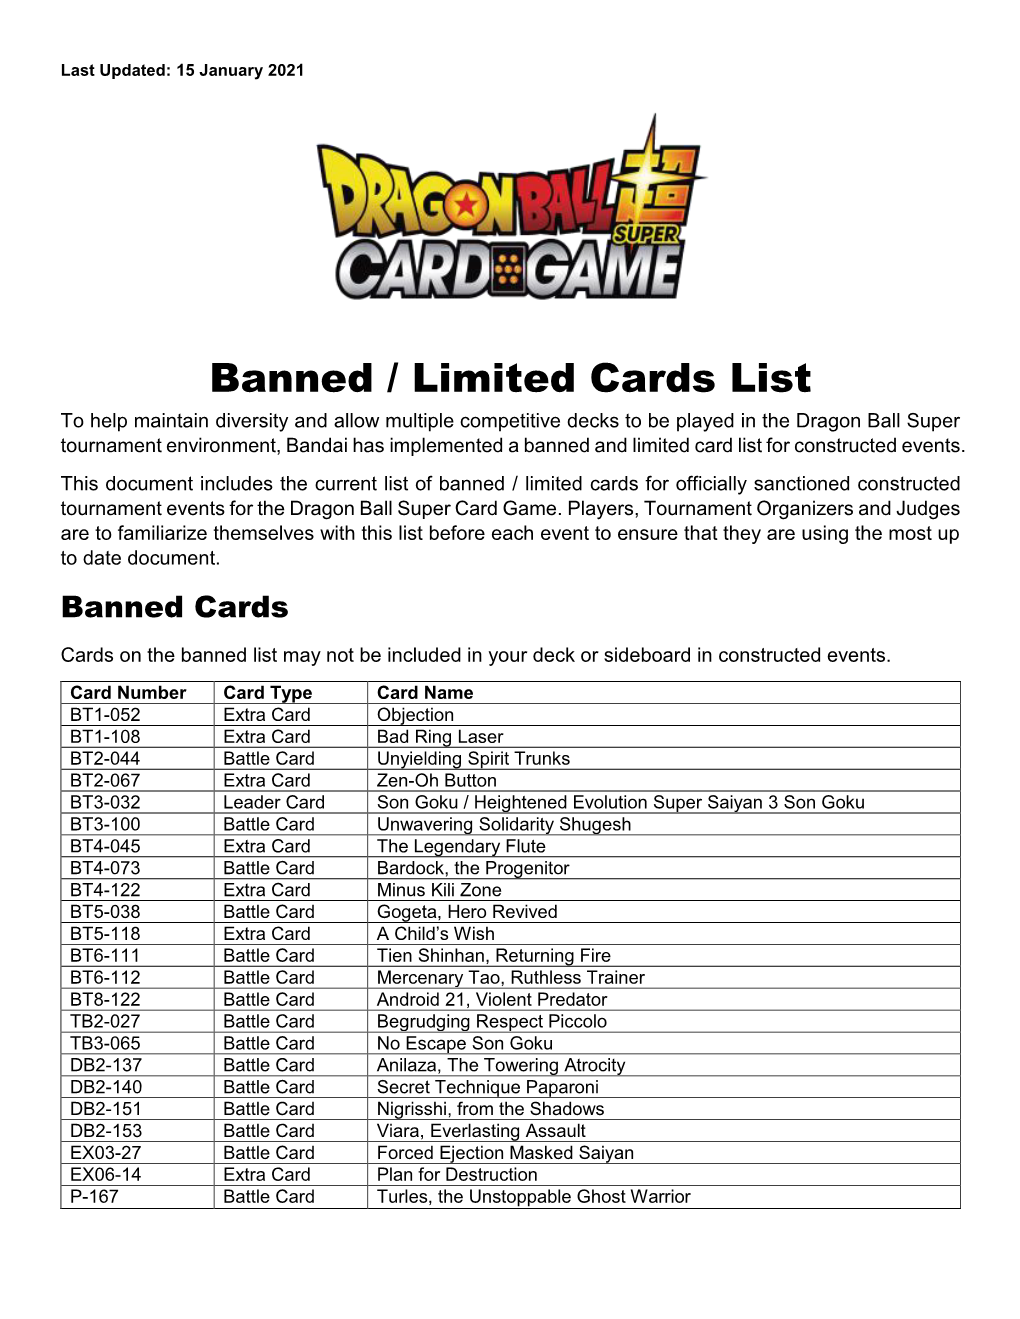 Banned / Limited Cards List